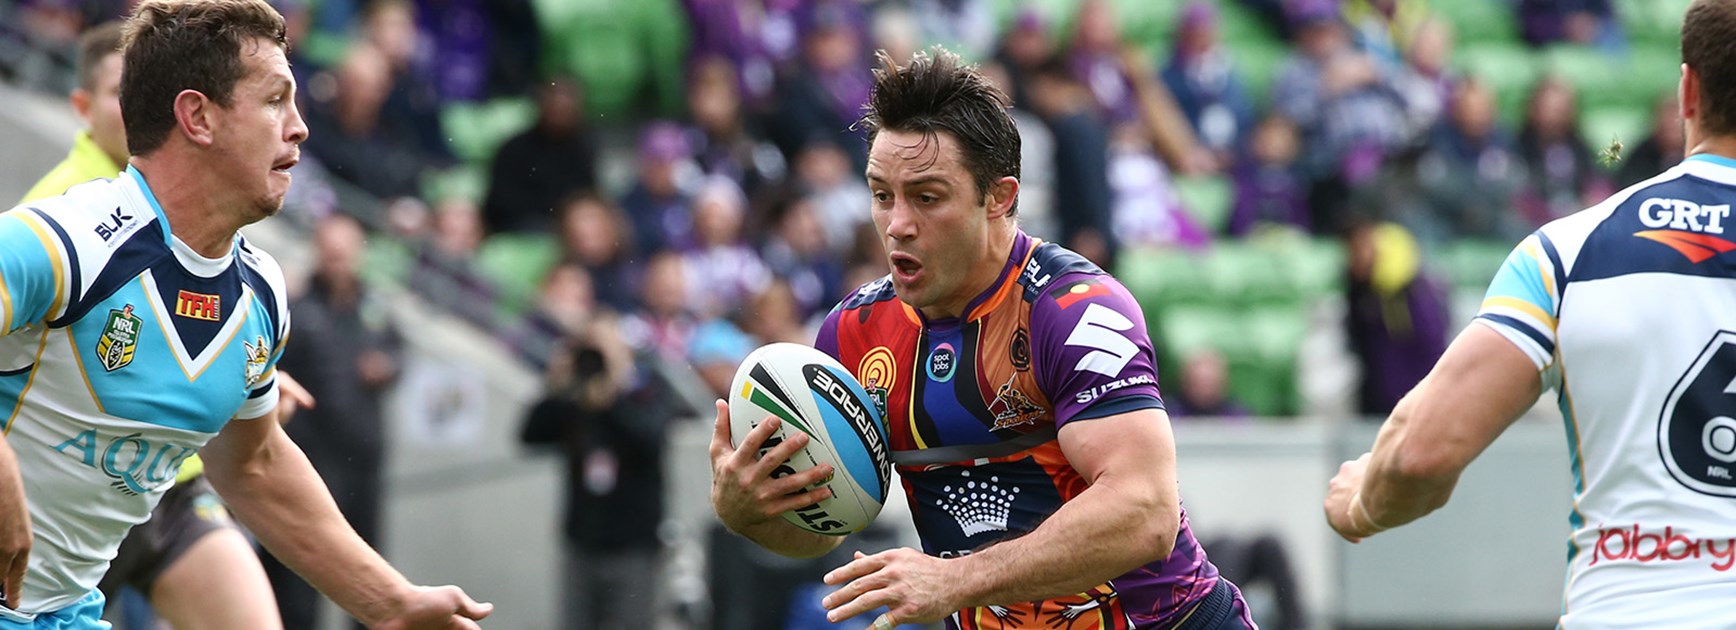 Cooper Cronk makes a run against the Titans in Round 22.